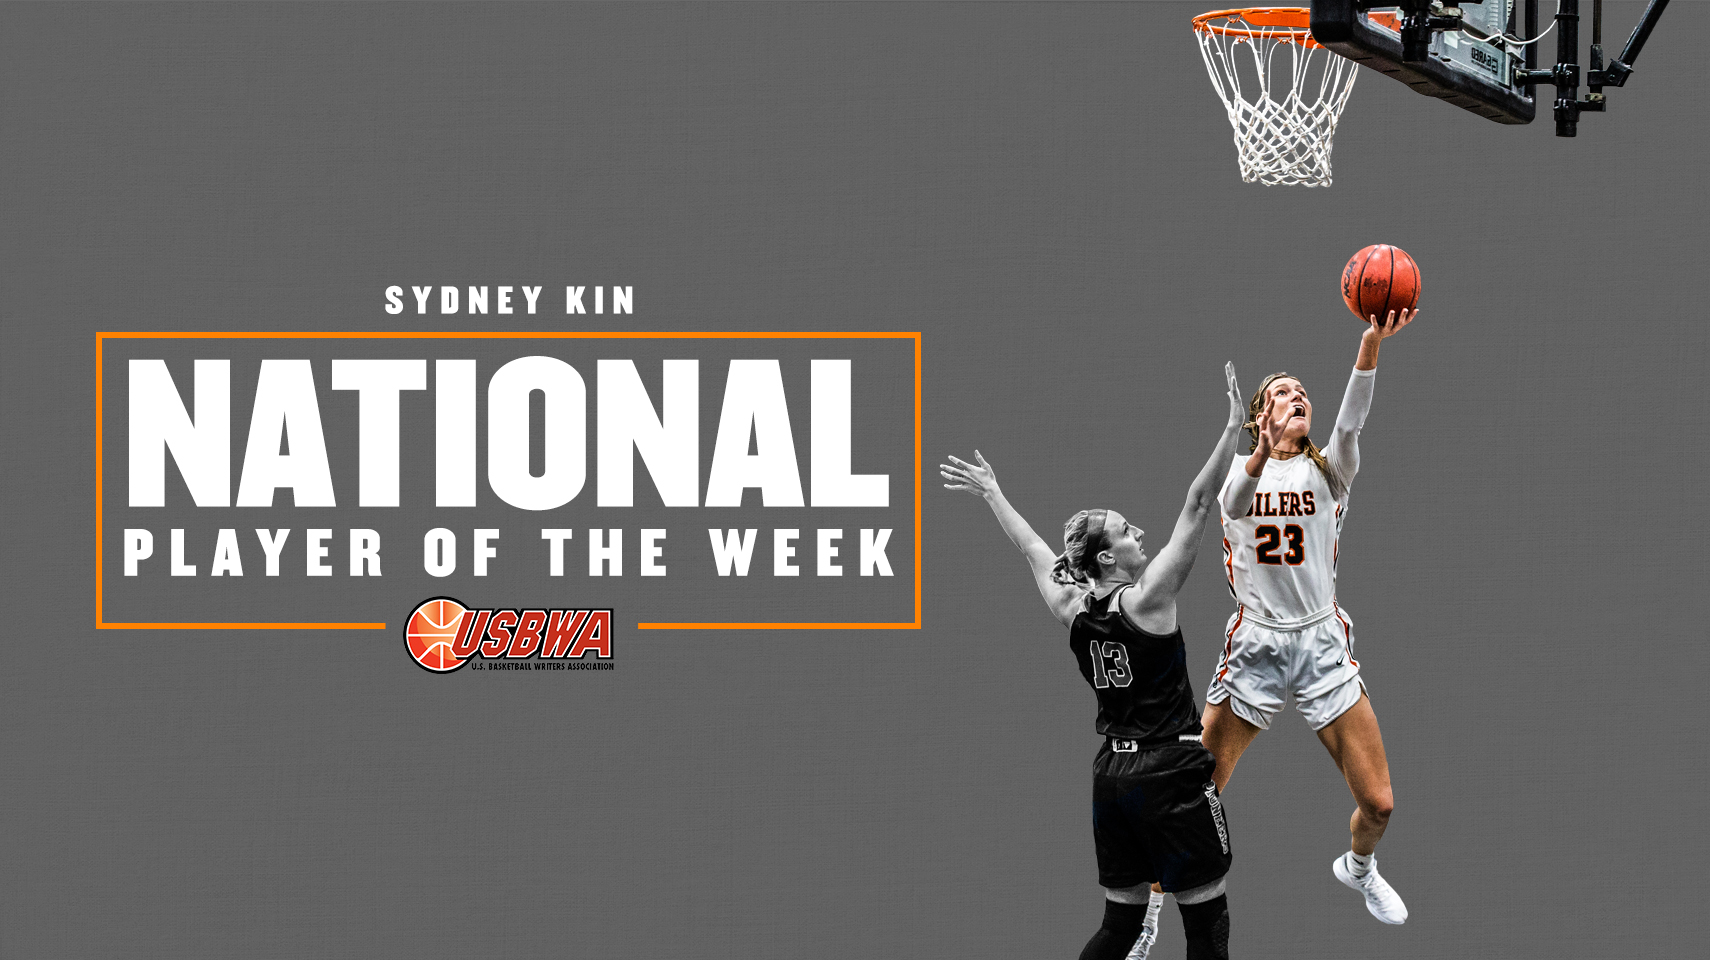 Kin Named USBWA National Player of the Week